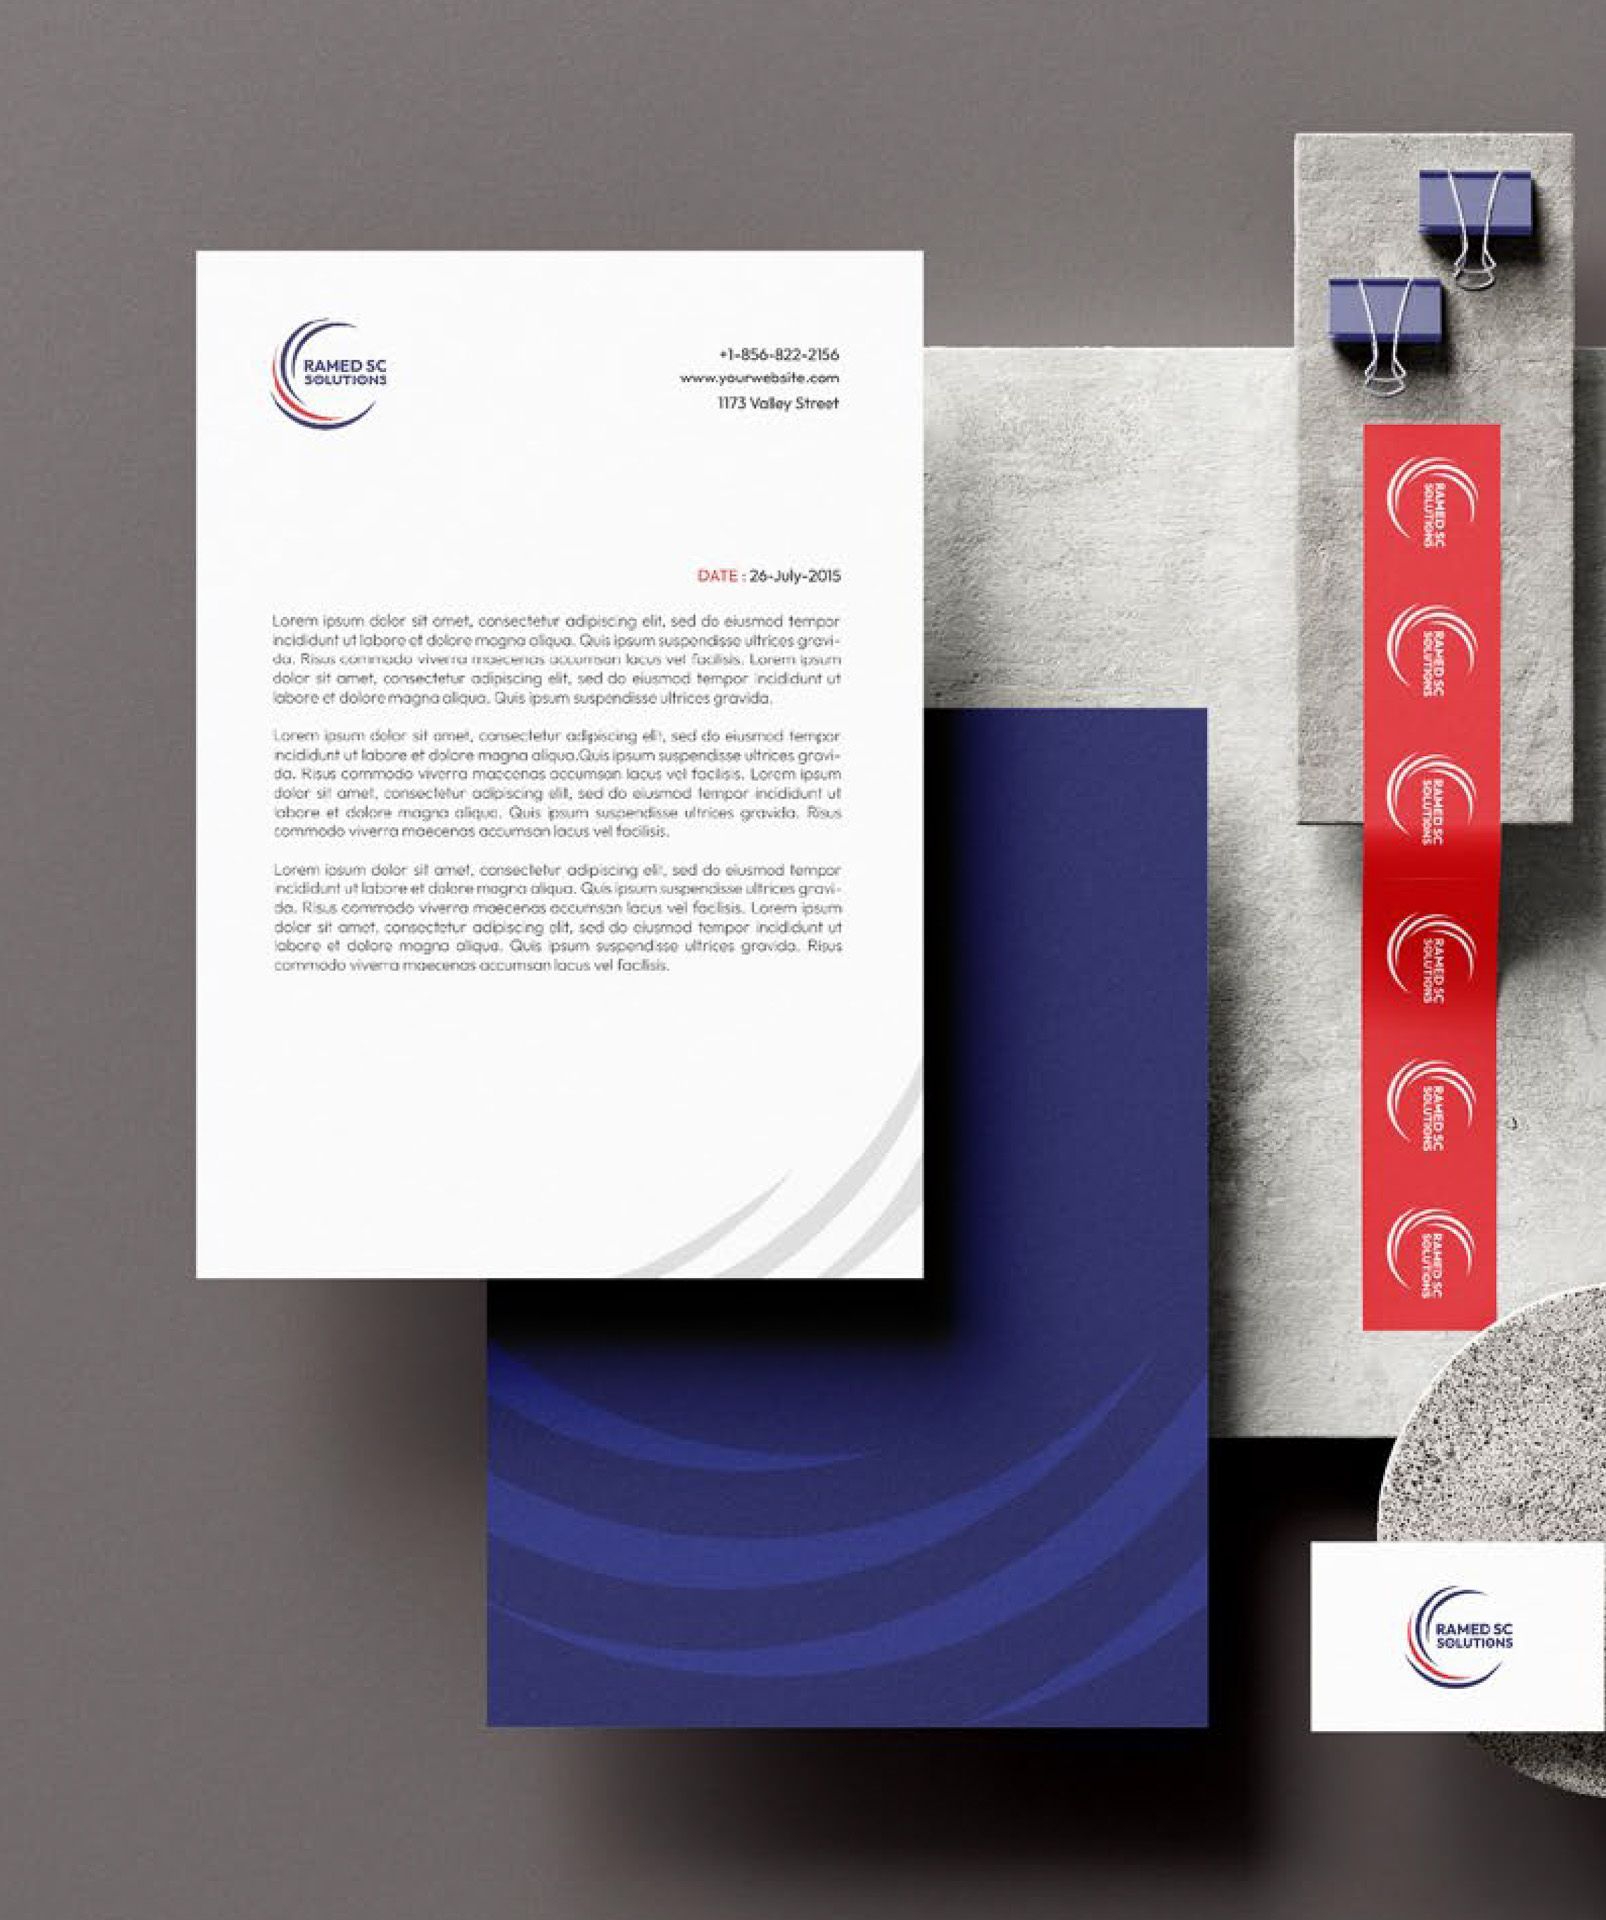 ThirdLaw branding and web design - RAMED SC Cover